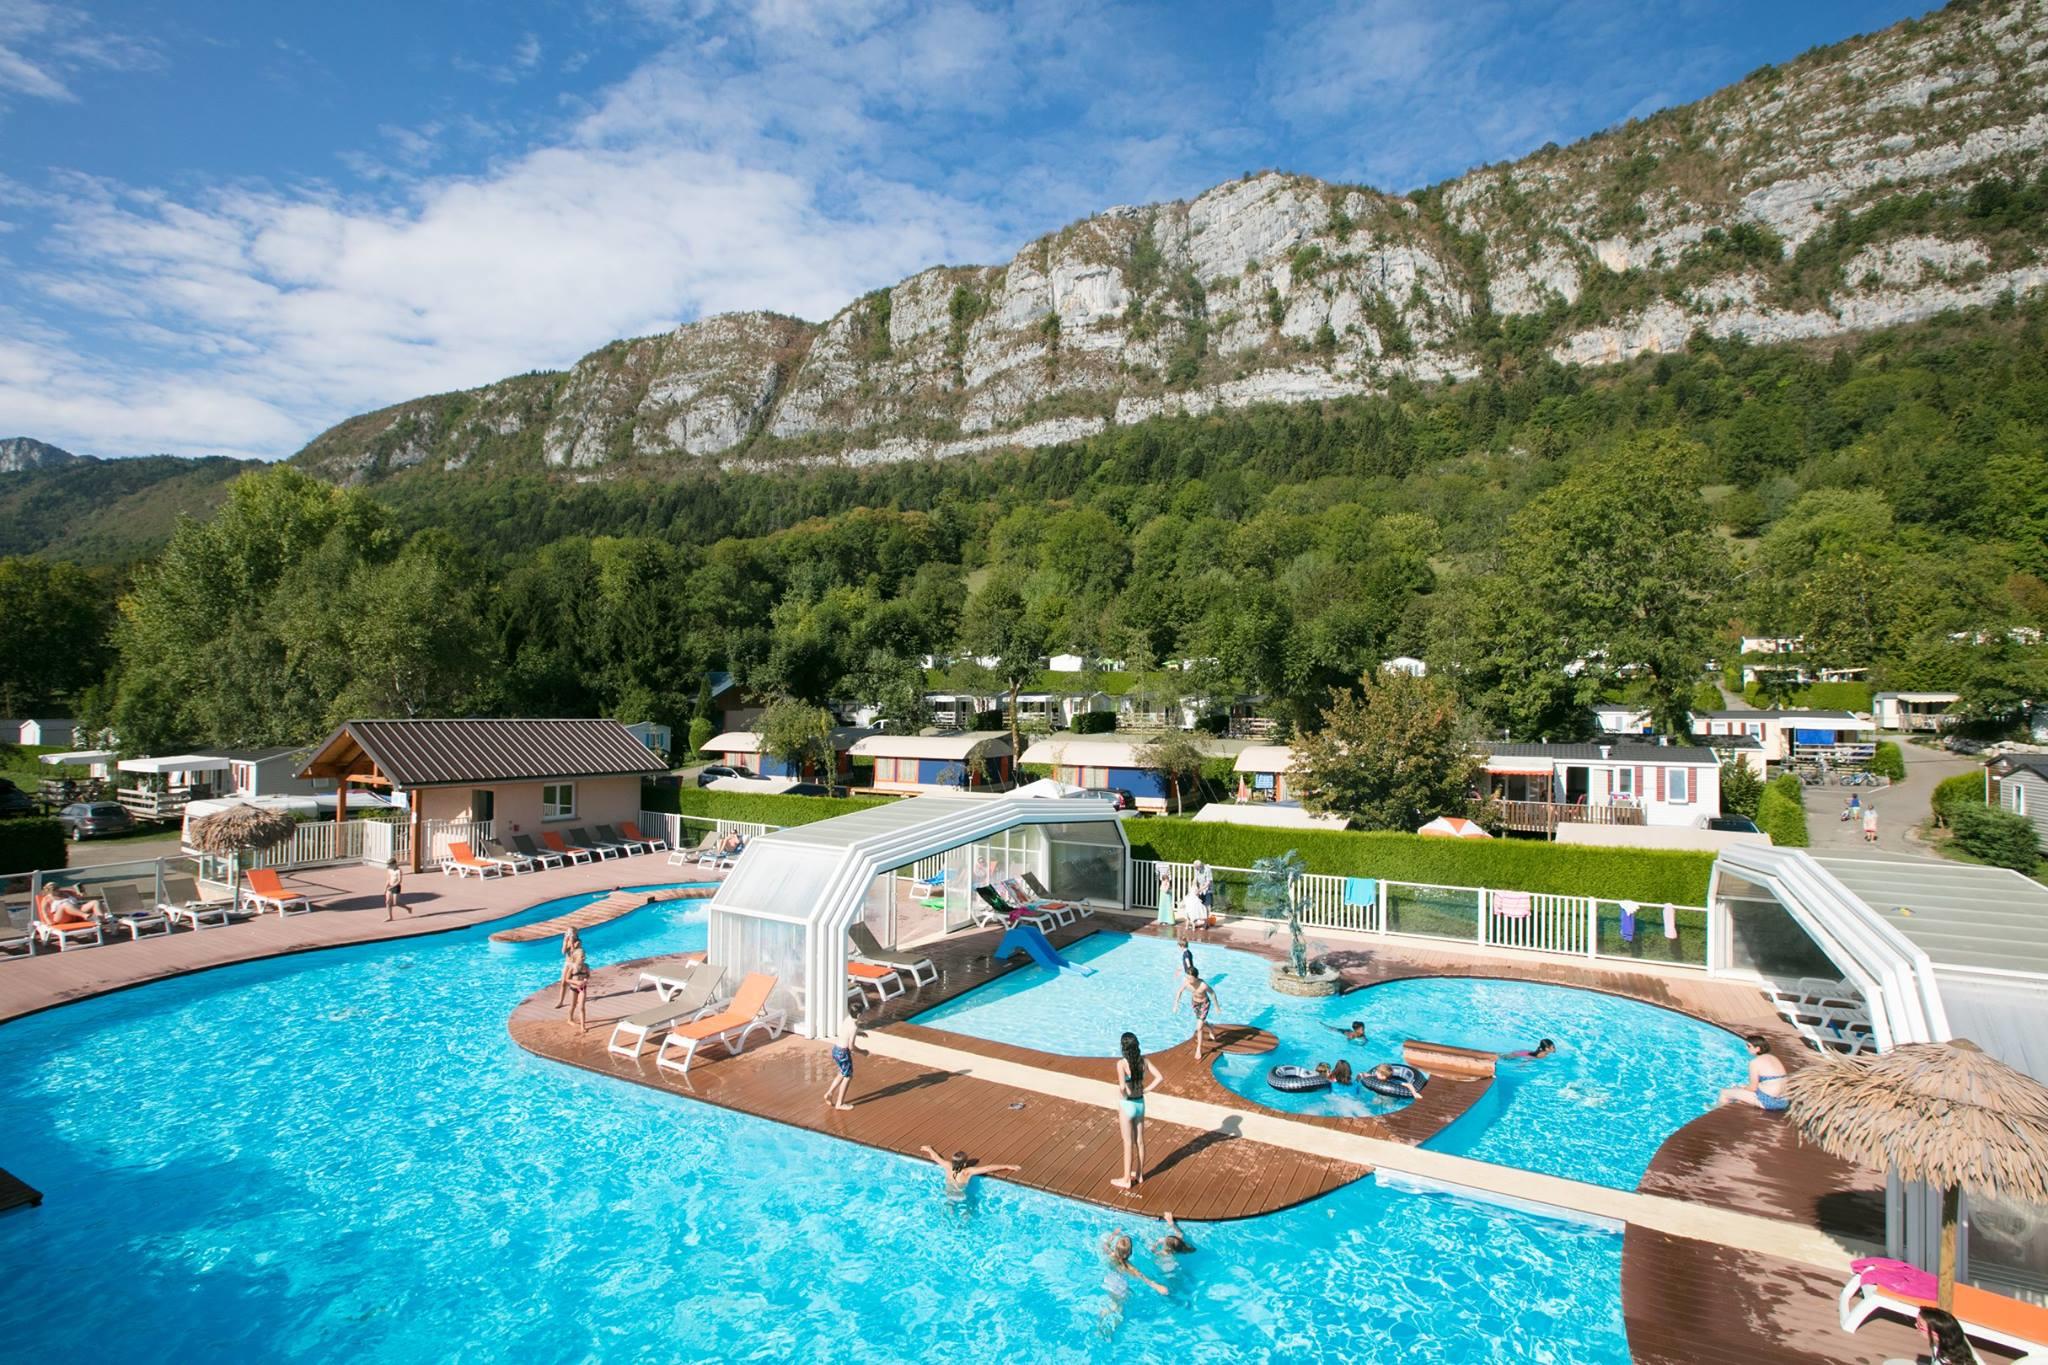 Bedrijf Camping Les Fontaines - Lathuile